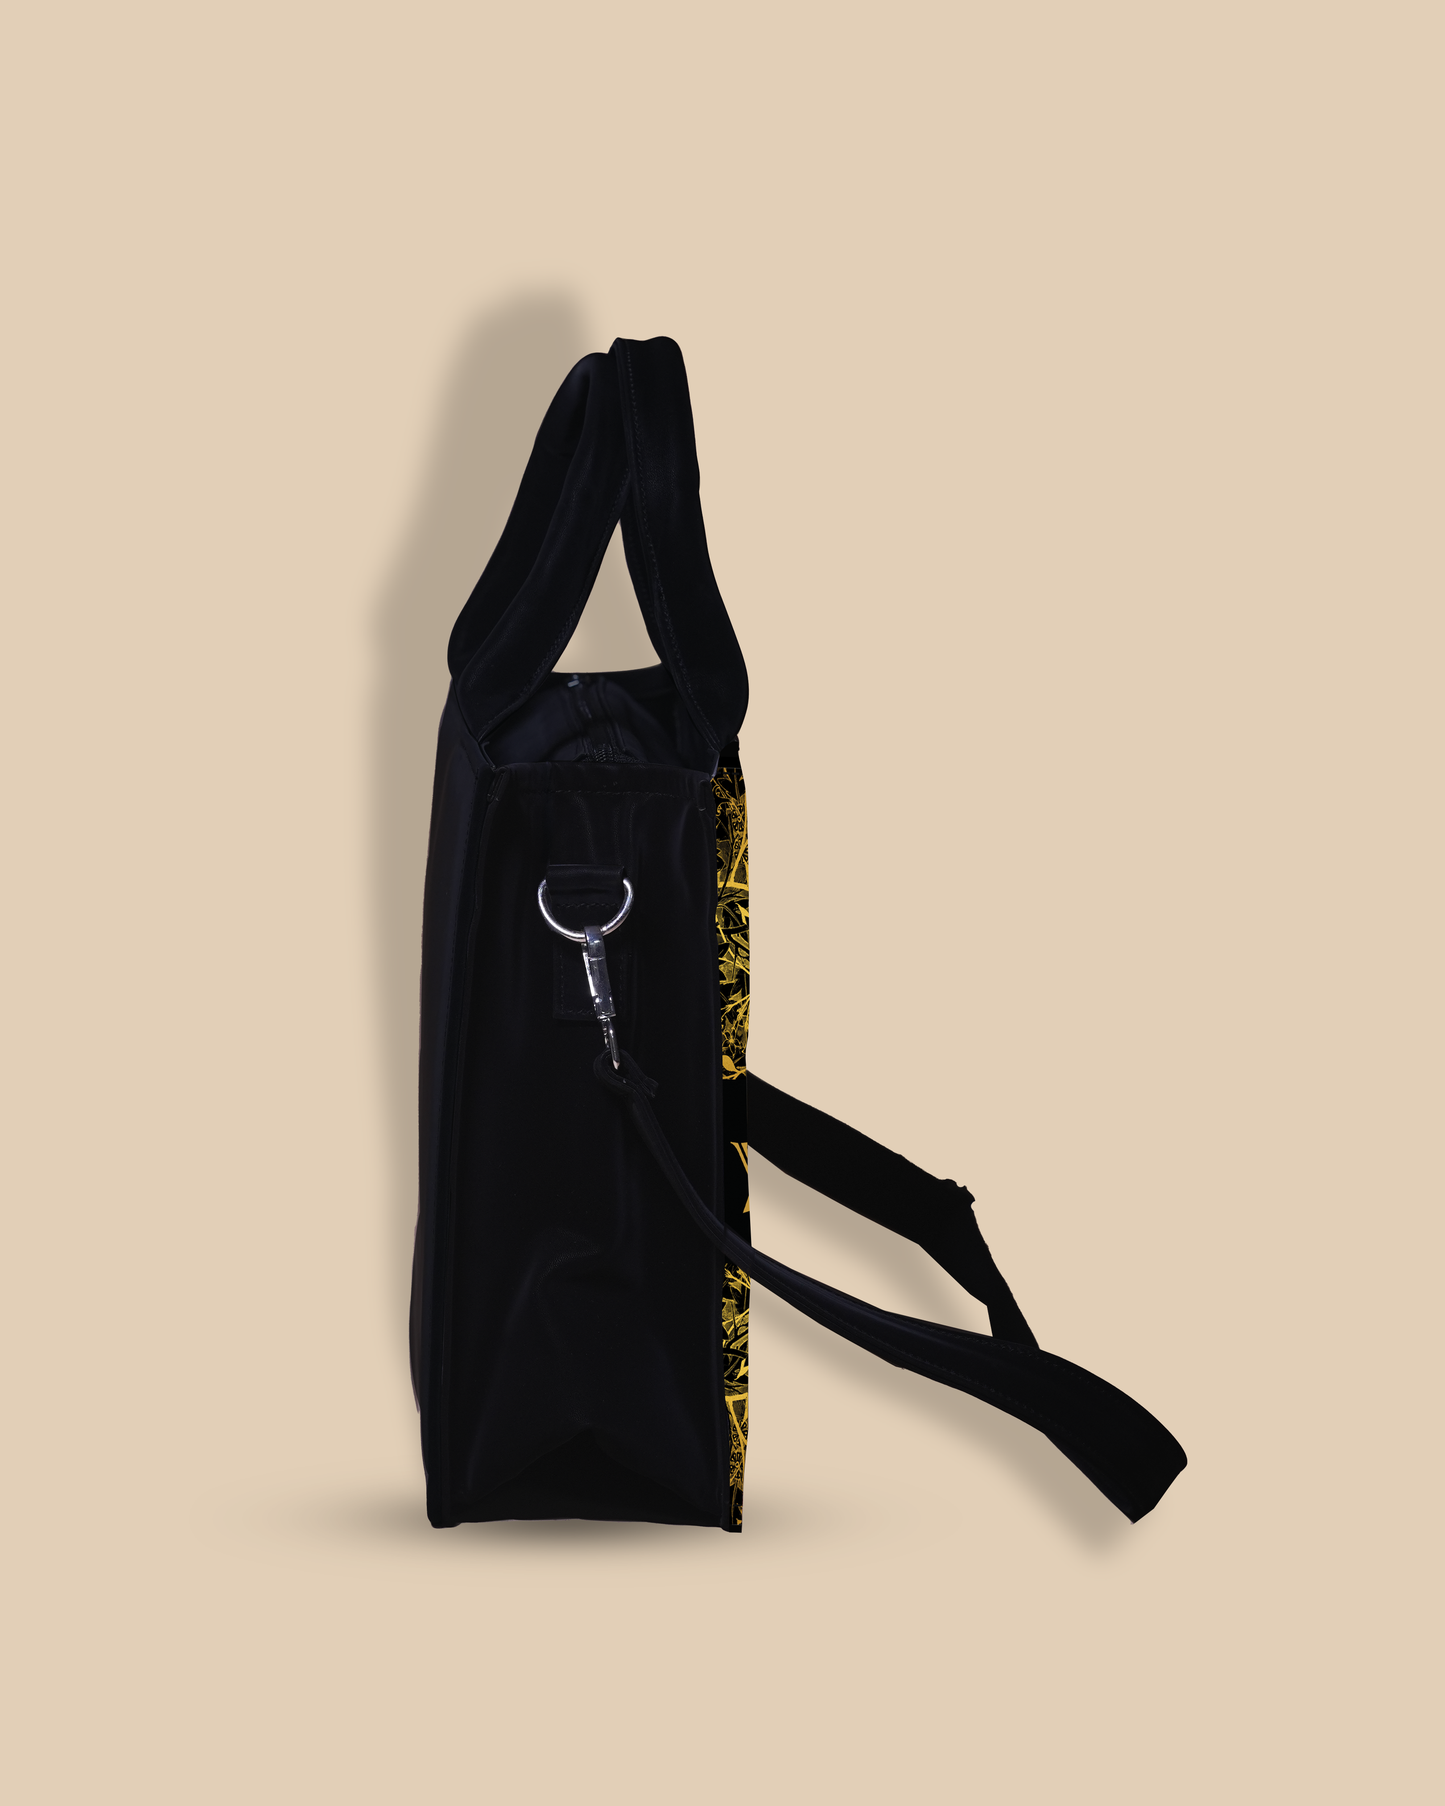 Customized small Tote Bag Designed with Graceful Golden Floral